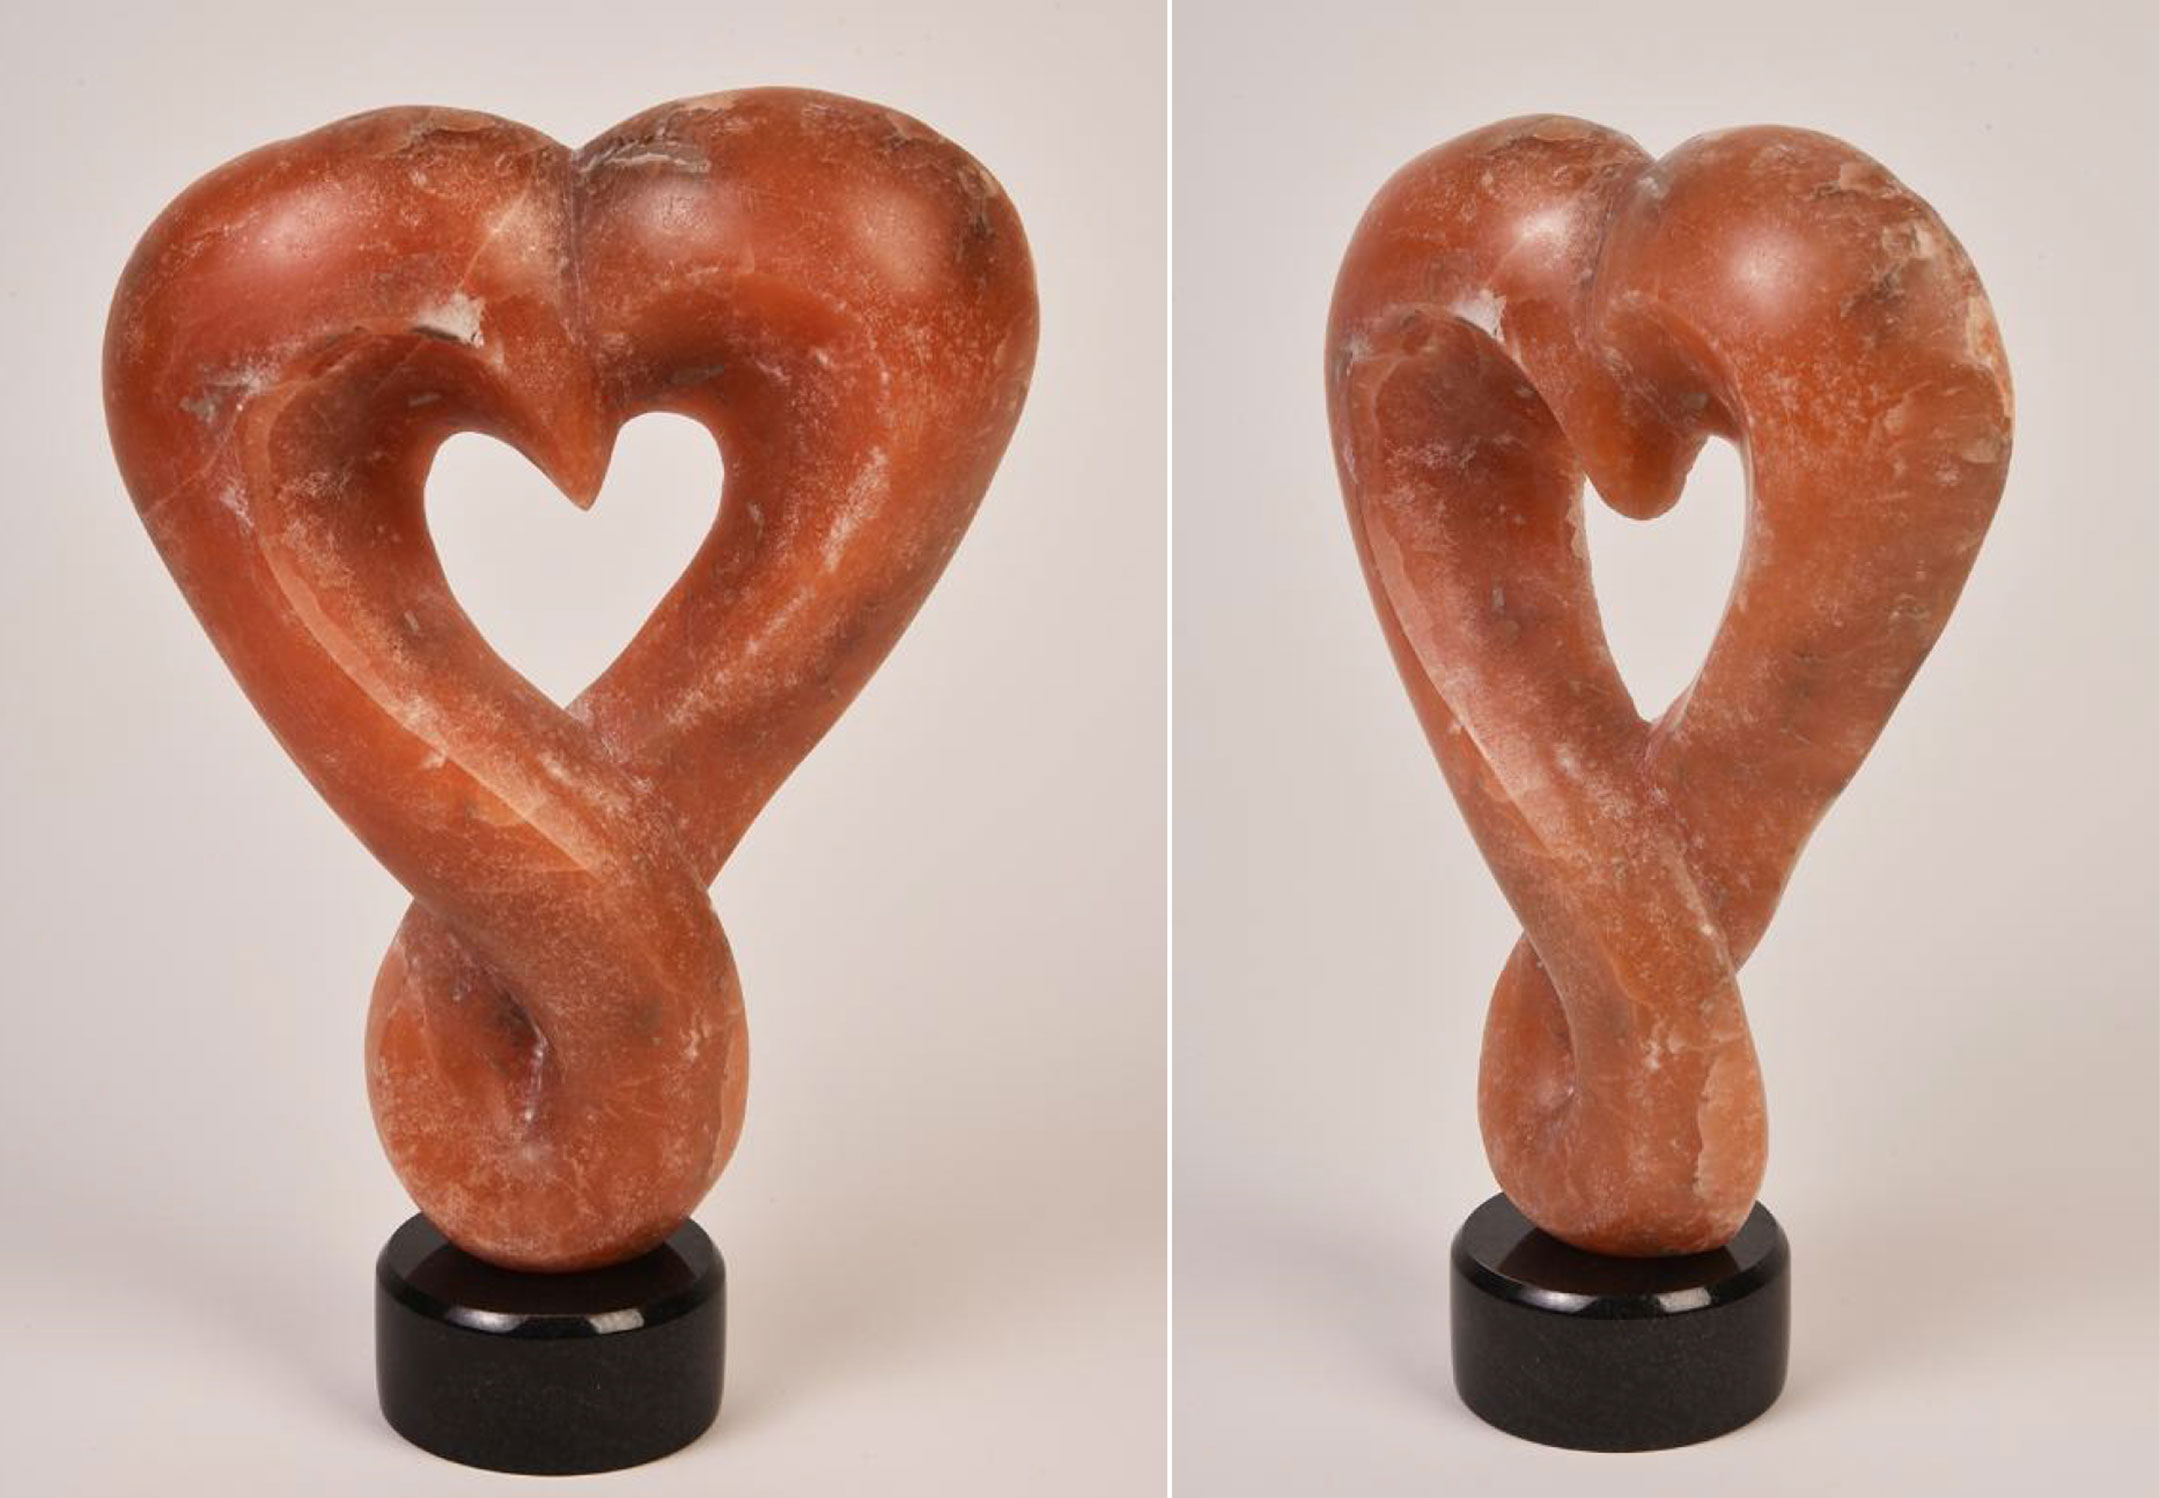 Two photos of a rock sculpture made to form a heart shape